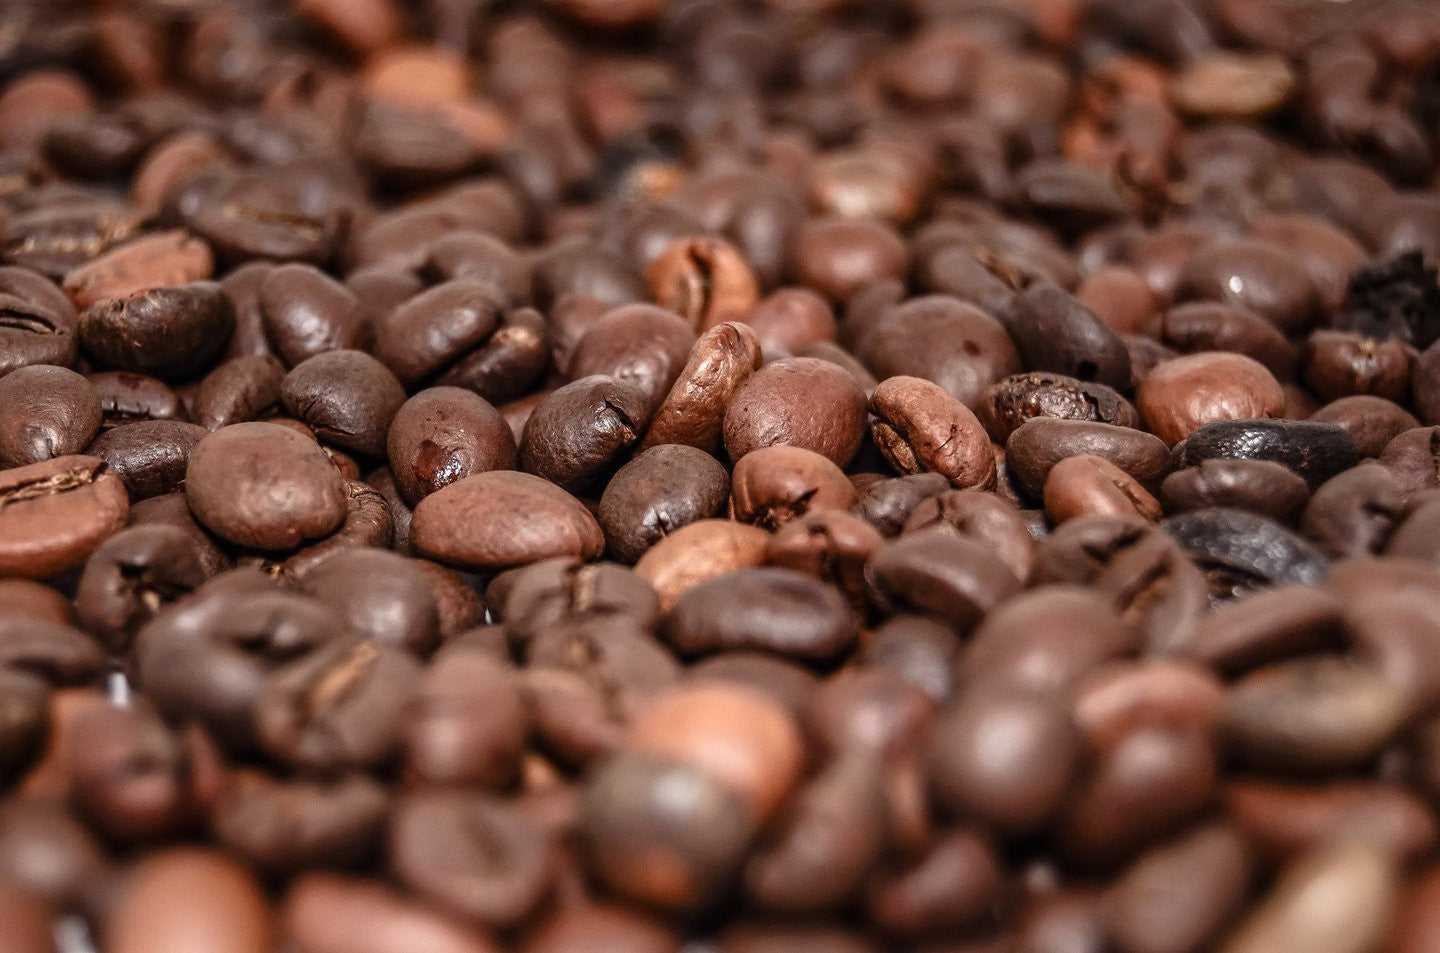 Coffee storage - Our top tips for keeping your beans fresh!